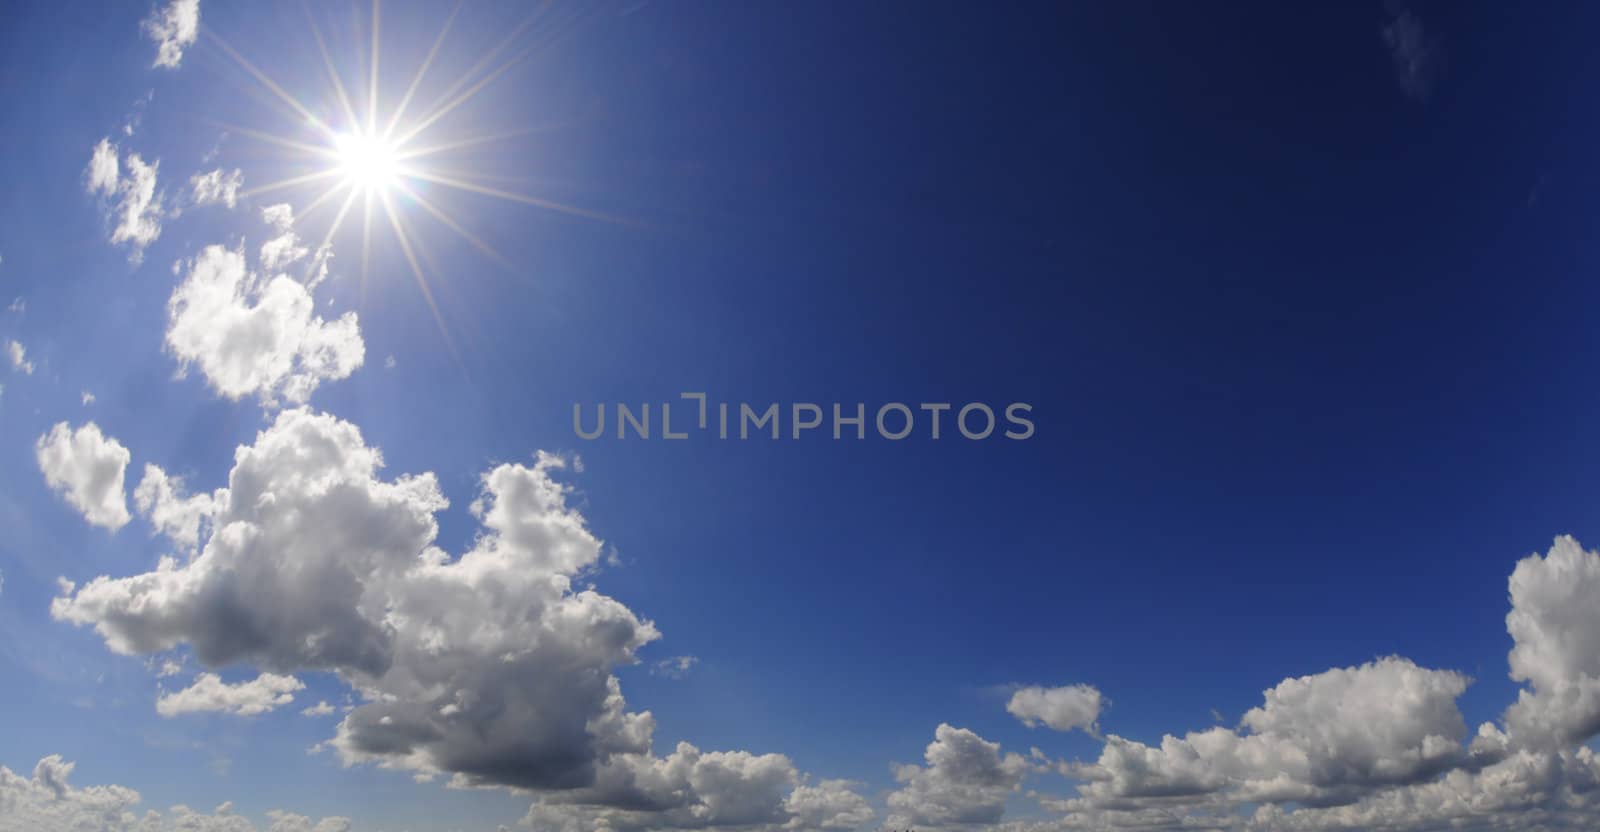 Blue sky with sbright shining sun and white clouds